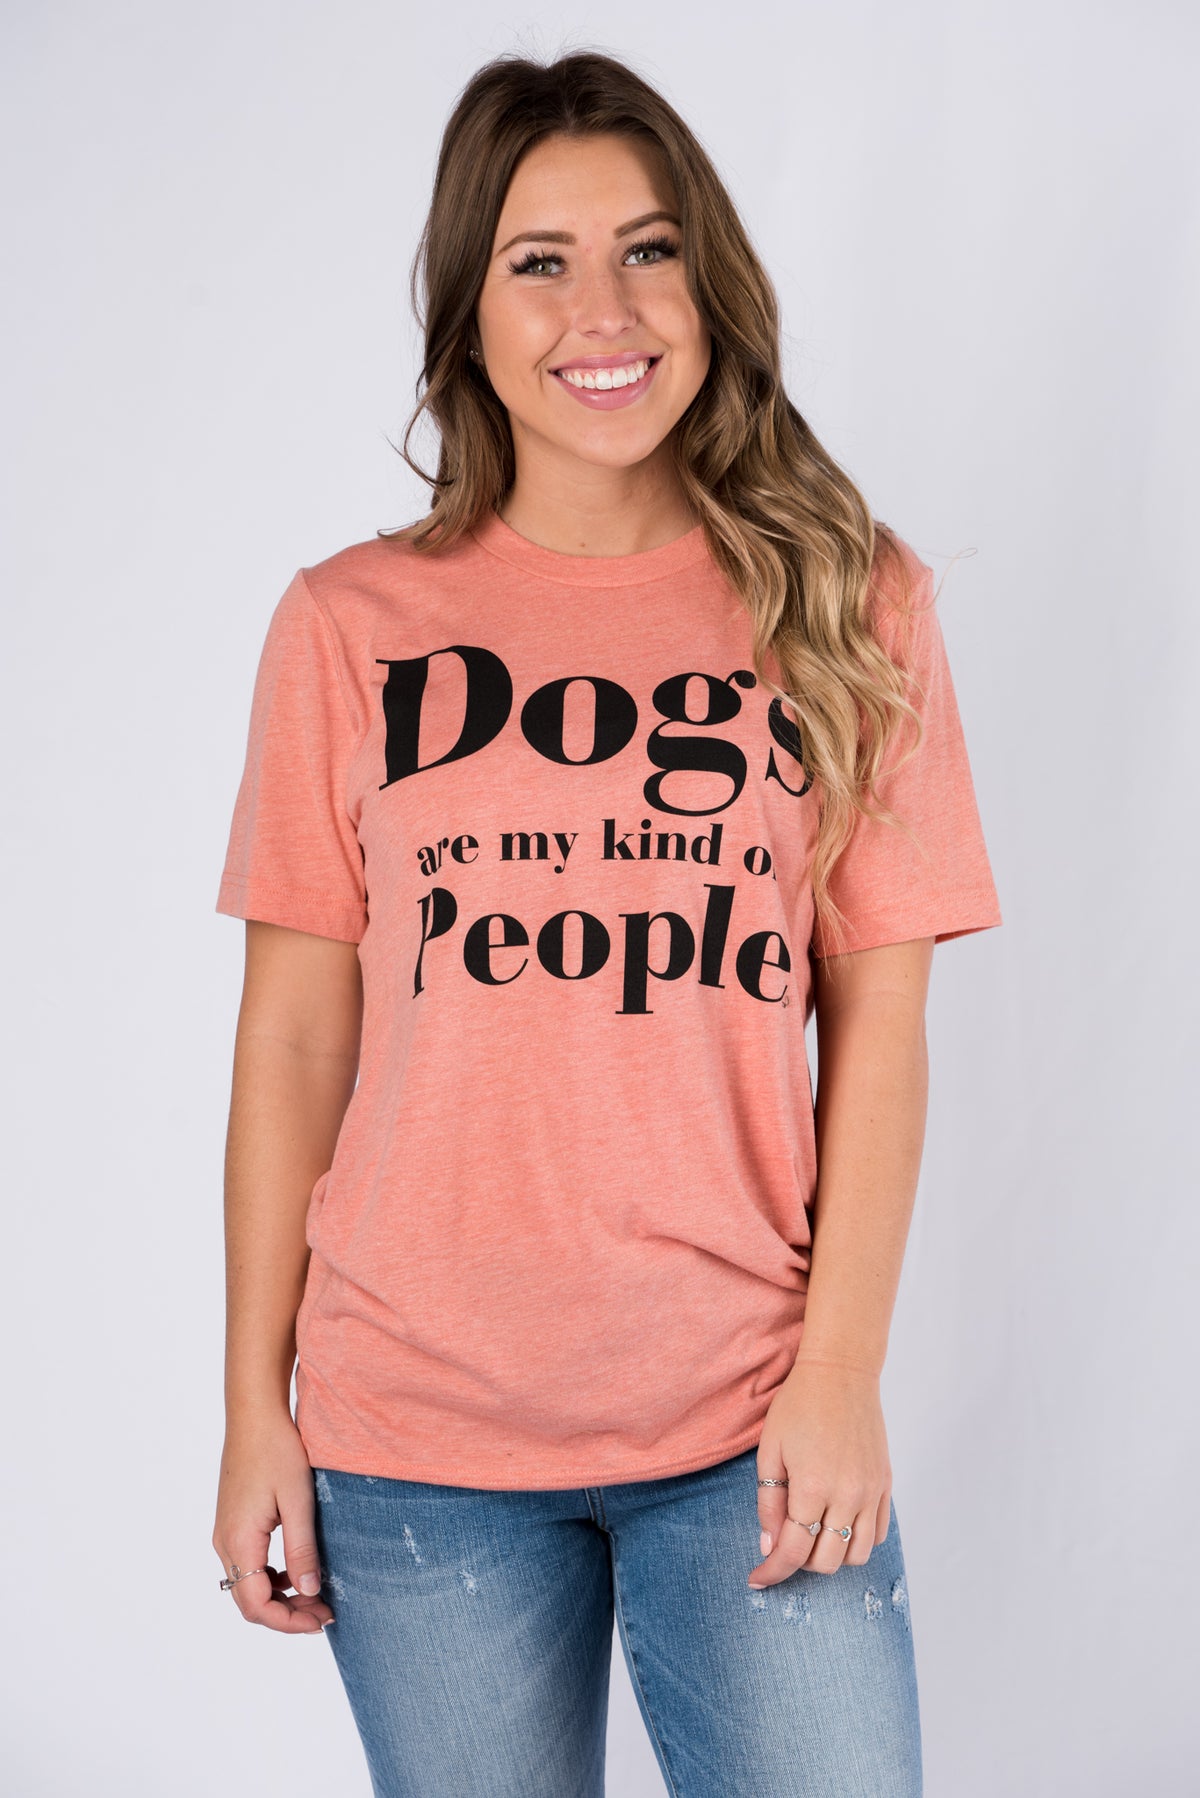 Dogs are my kind of people unisex short sleeve crew neck t-shirt sunset - Stylish T-shirts - Trendy Graphic T-Shirts and Tank Tops at Lush Fashion Lounge Boutique in Oklahoma City